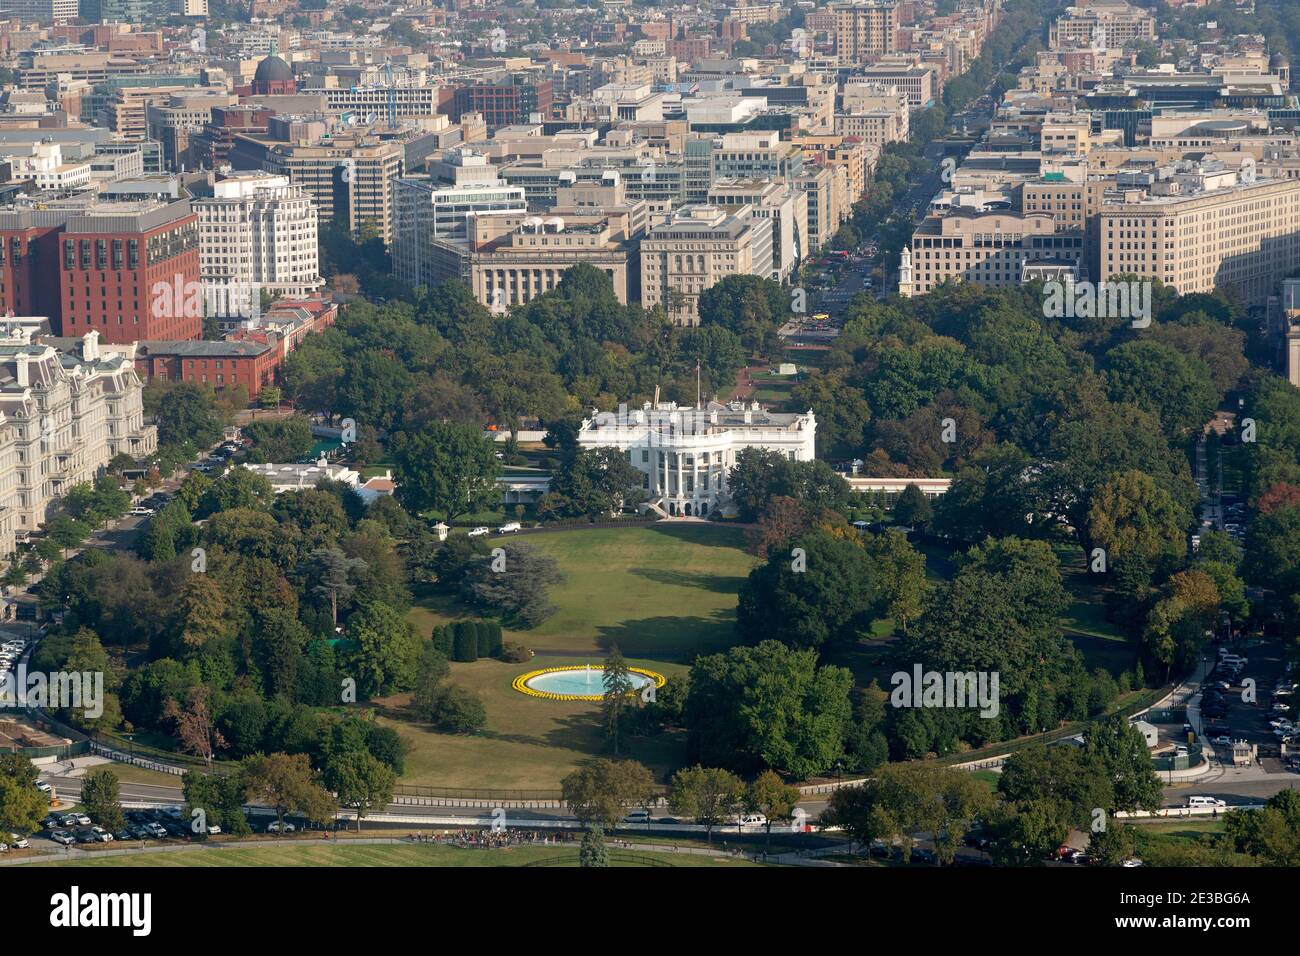 The White House in Washington DC, USA. The building is the official residence and workplace of the President of the United States of America. Stock Photo